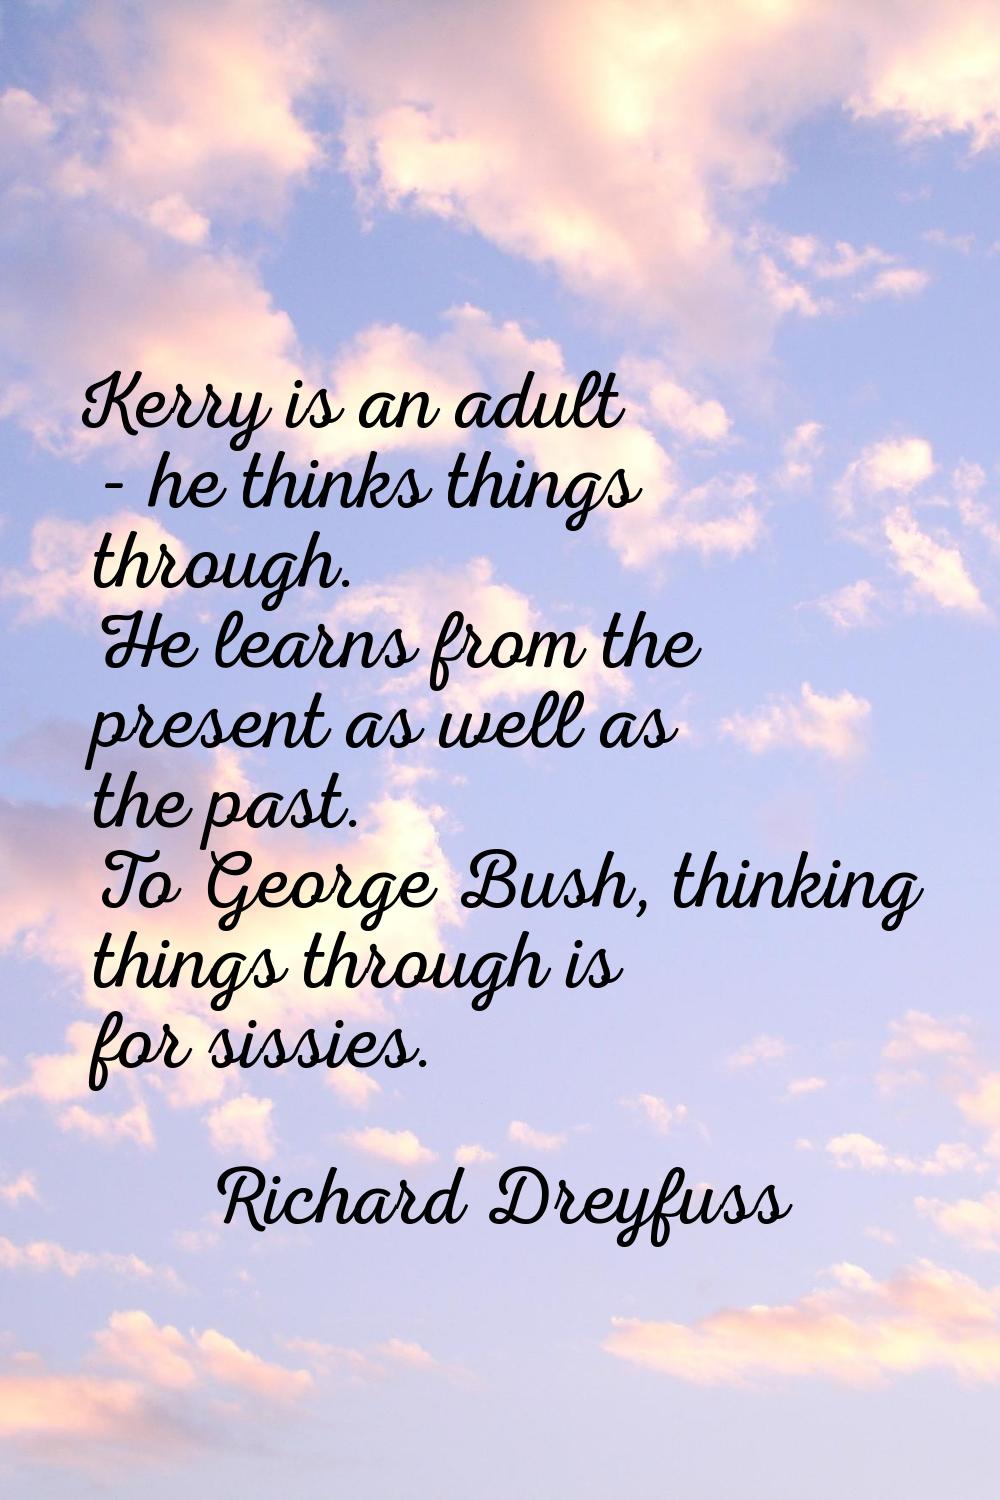 Kerry is an adult - he thinks things through. He learns from the present as well as the past. To Ge